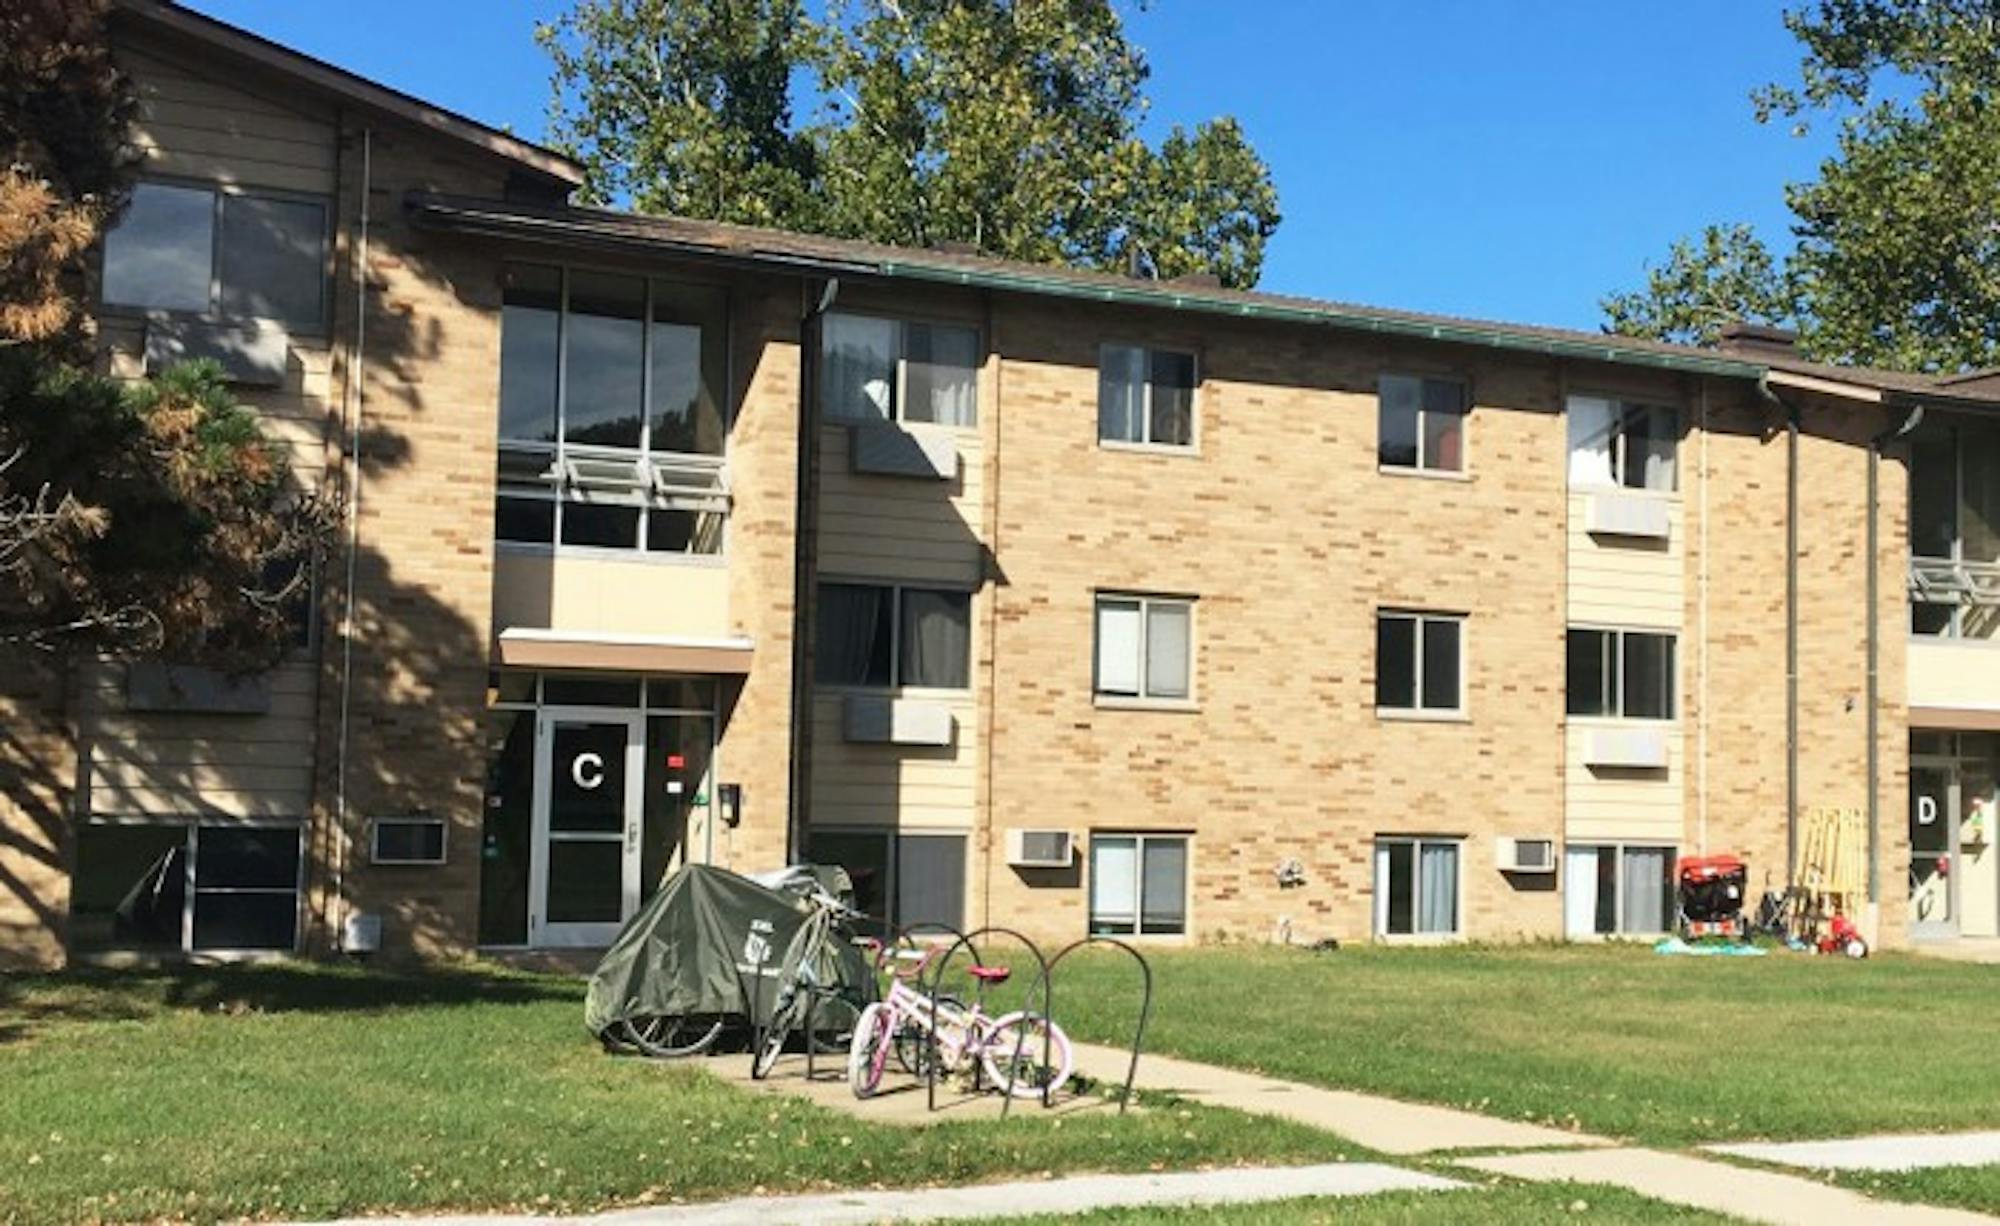 University Village, which provides graduate students and their families with housing, will be officially shut down in June of 2018. In response to this announcement, the ‘Save the Village’ movement has petitioned for alternate family housing.